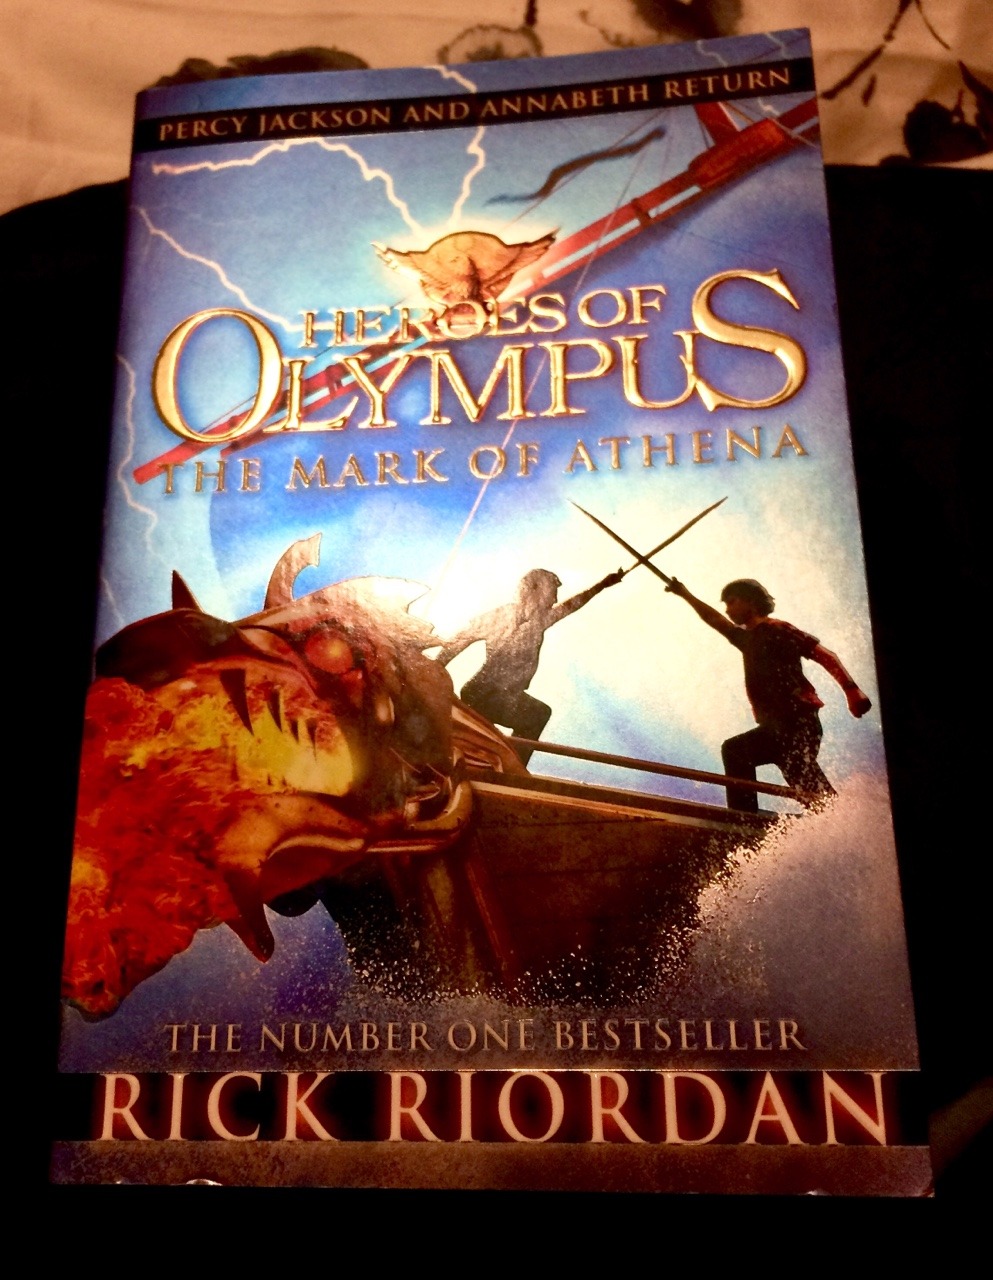 the mark of athena full book